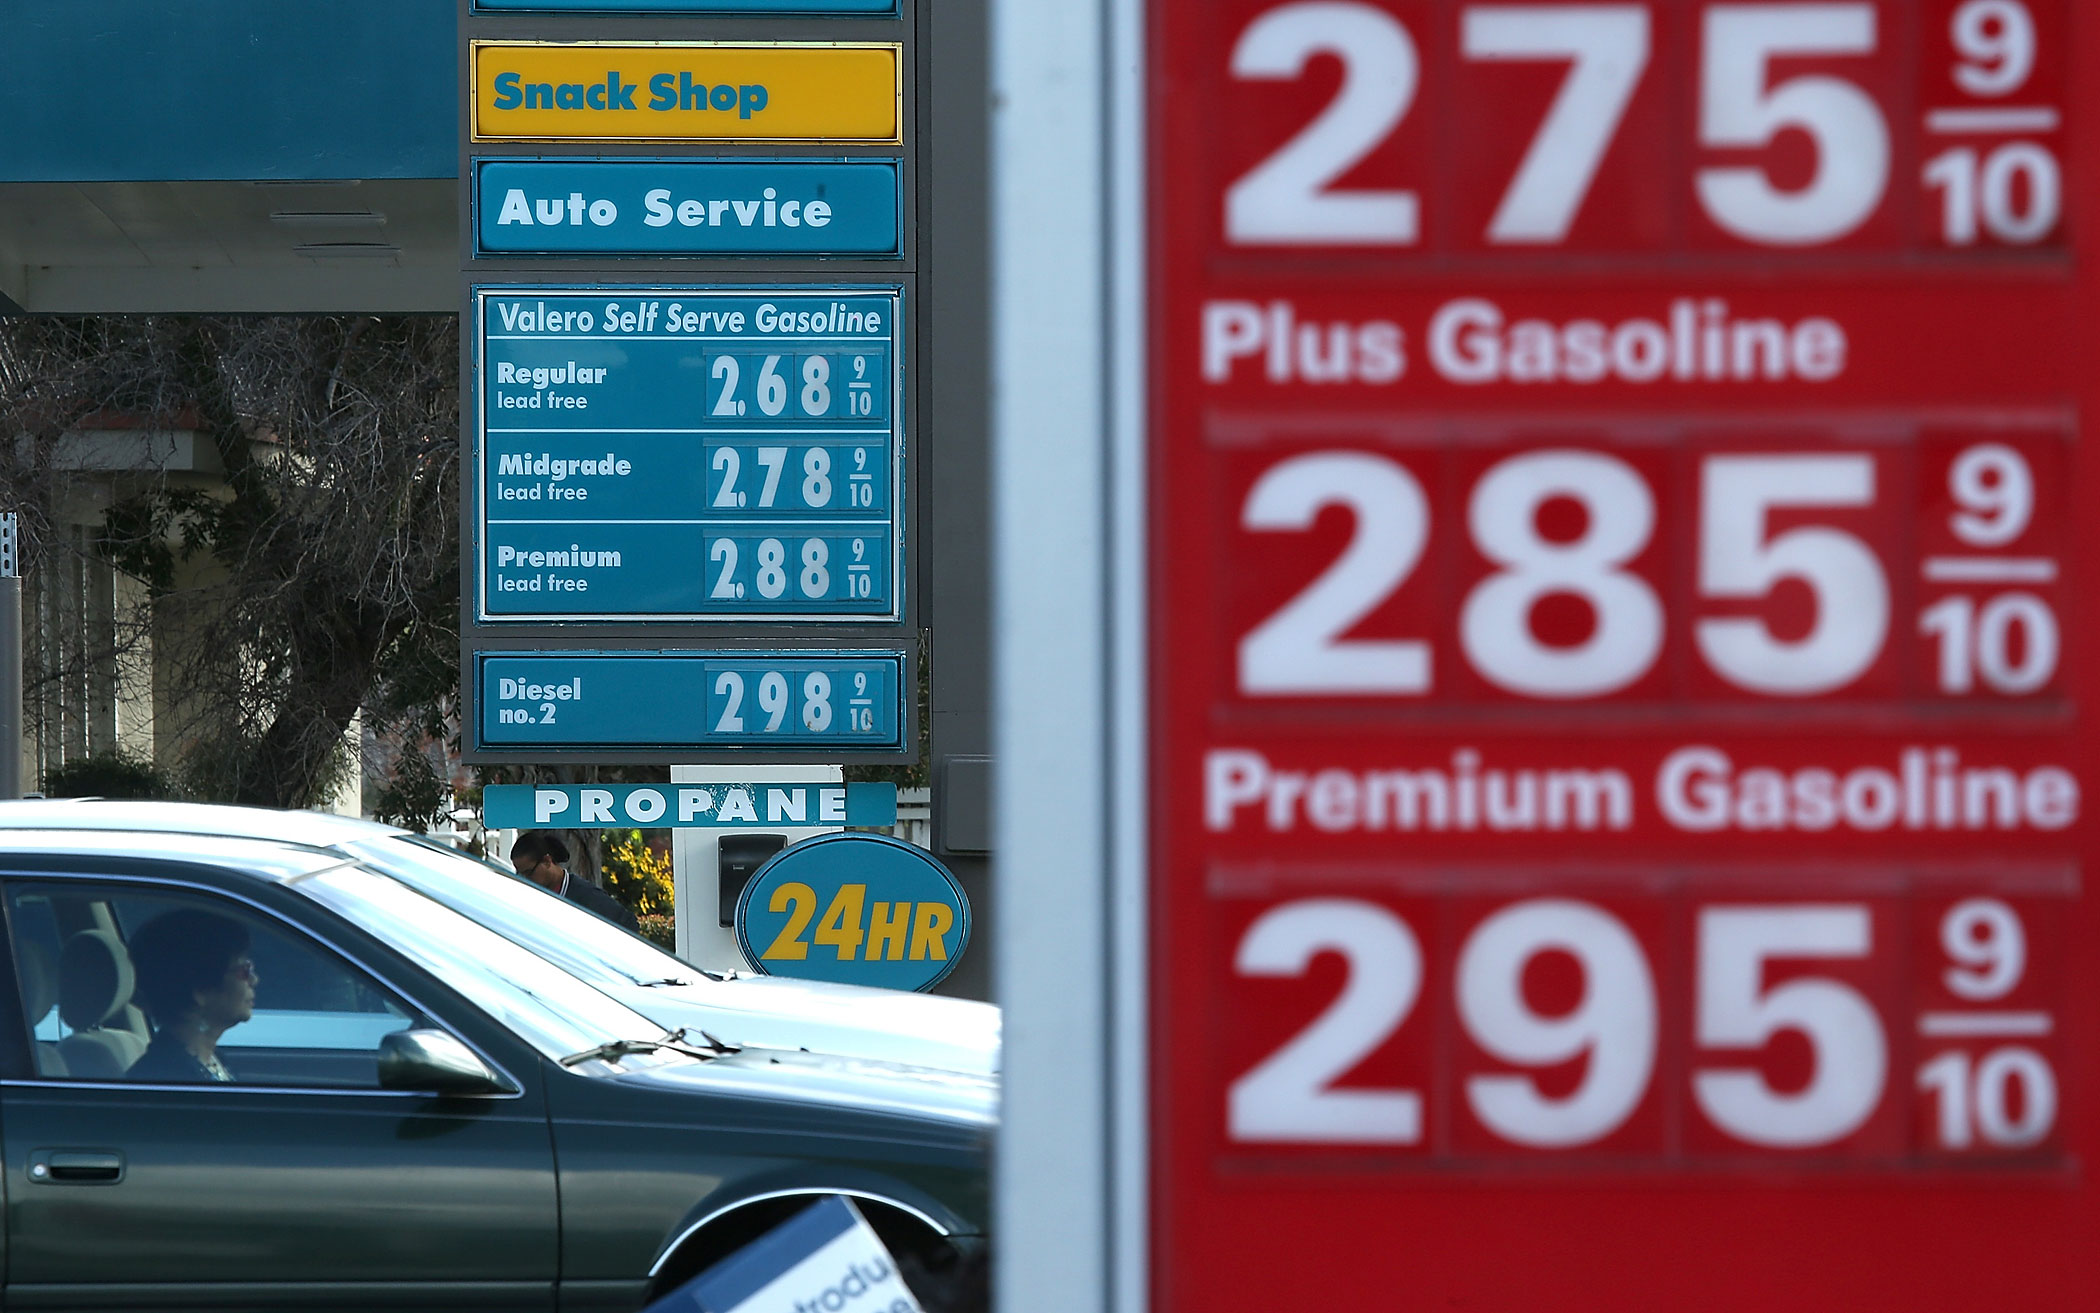 Drivers pass by gas prices that are displayed at Valero and 76 gas stations on Feb. 9, 2015 in San Rafael, Calif.